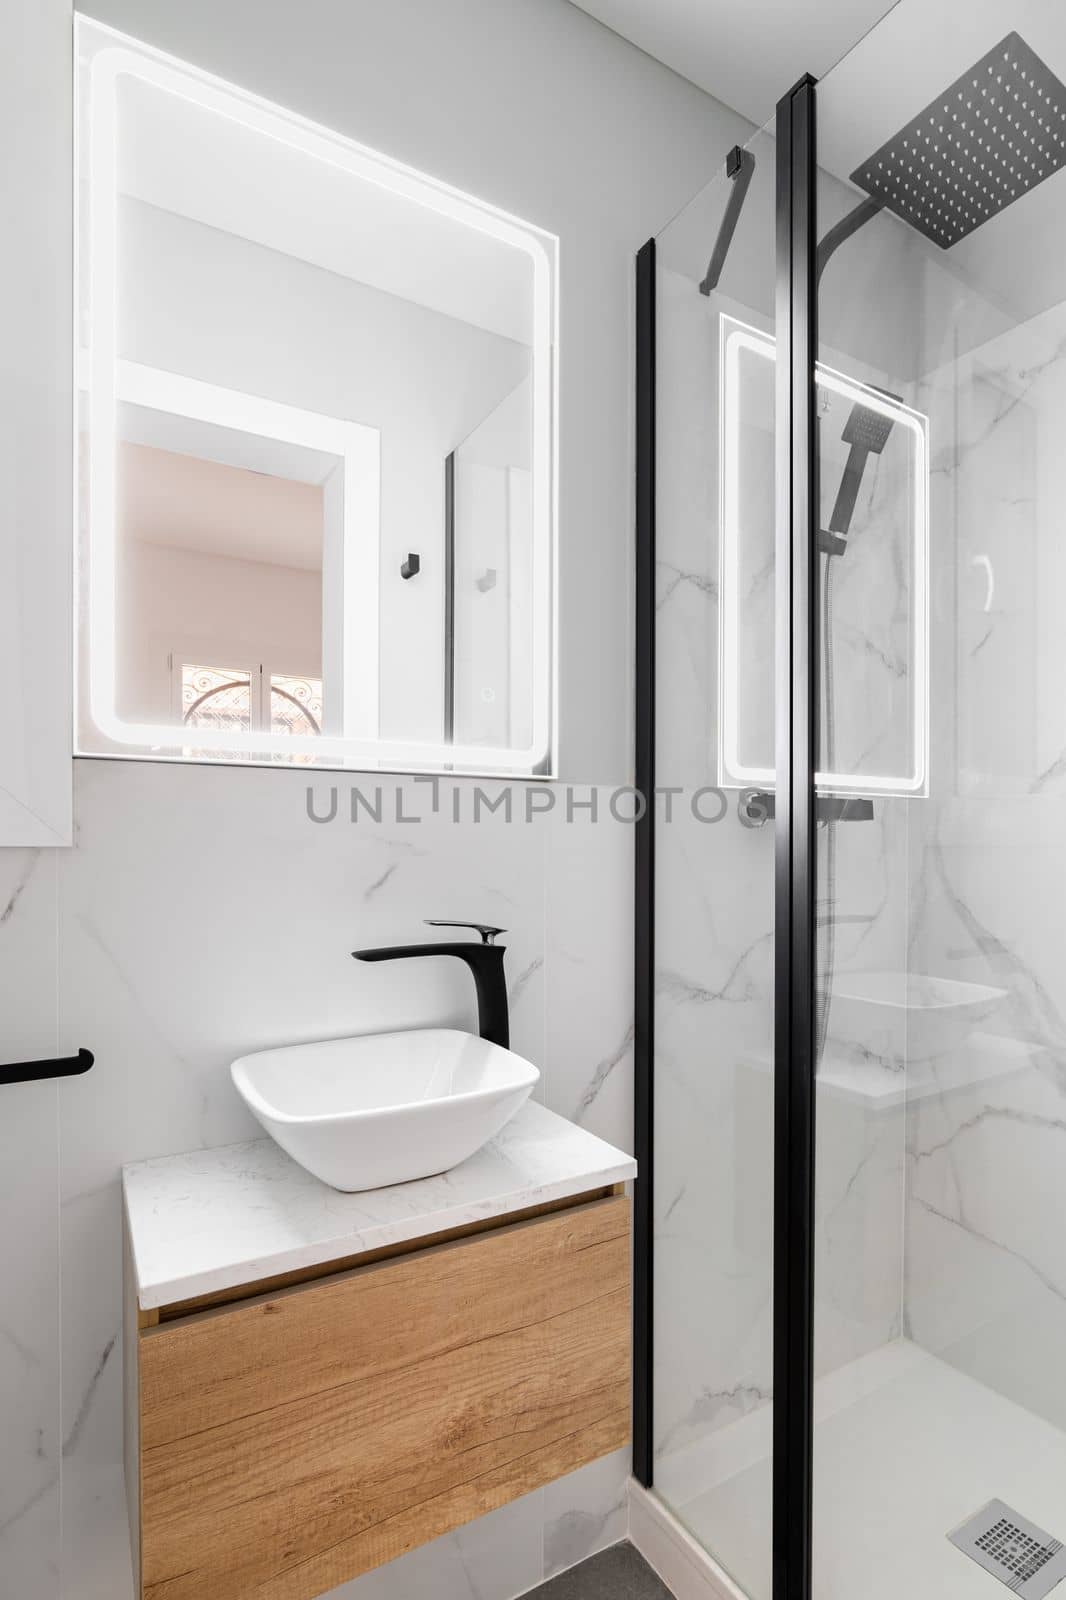 Bathroom with modern designer renovation and fittings. Vanity sink with black faucet. Walls of white granite with gray stains are beautifully illuminated by bright white light from square mirror. by apavlin